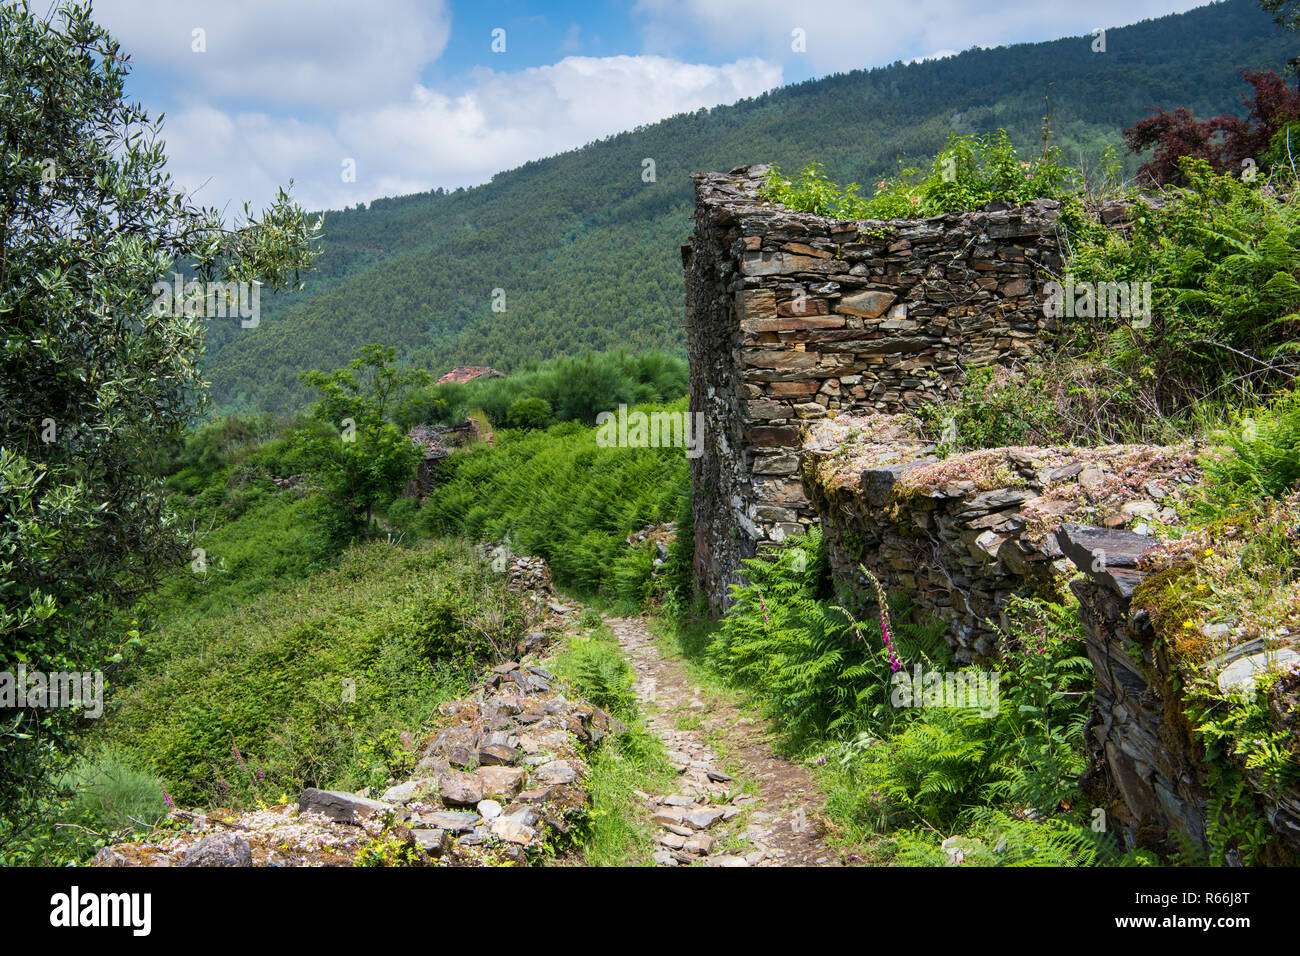 Overgrown ruins and lush landscape along the fern-lined hiking trail to the schist village of Talasnal in the Serra da Lousa mountains of Portugal Stock Photo